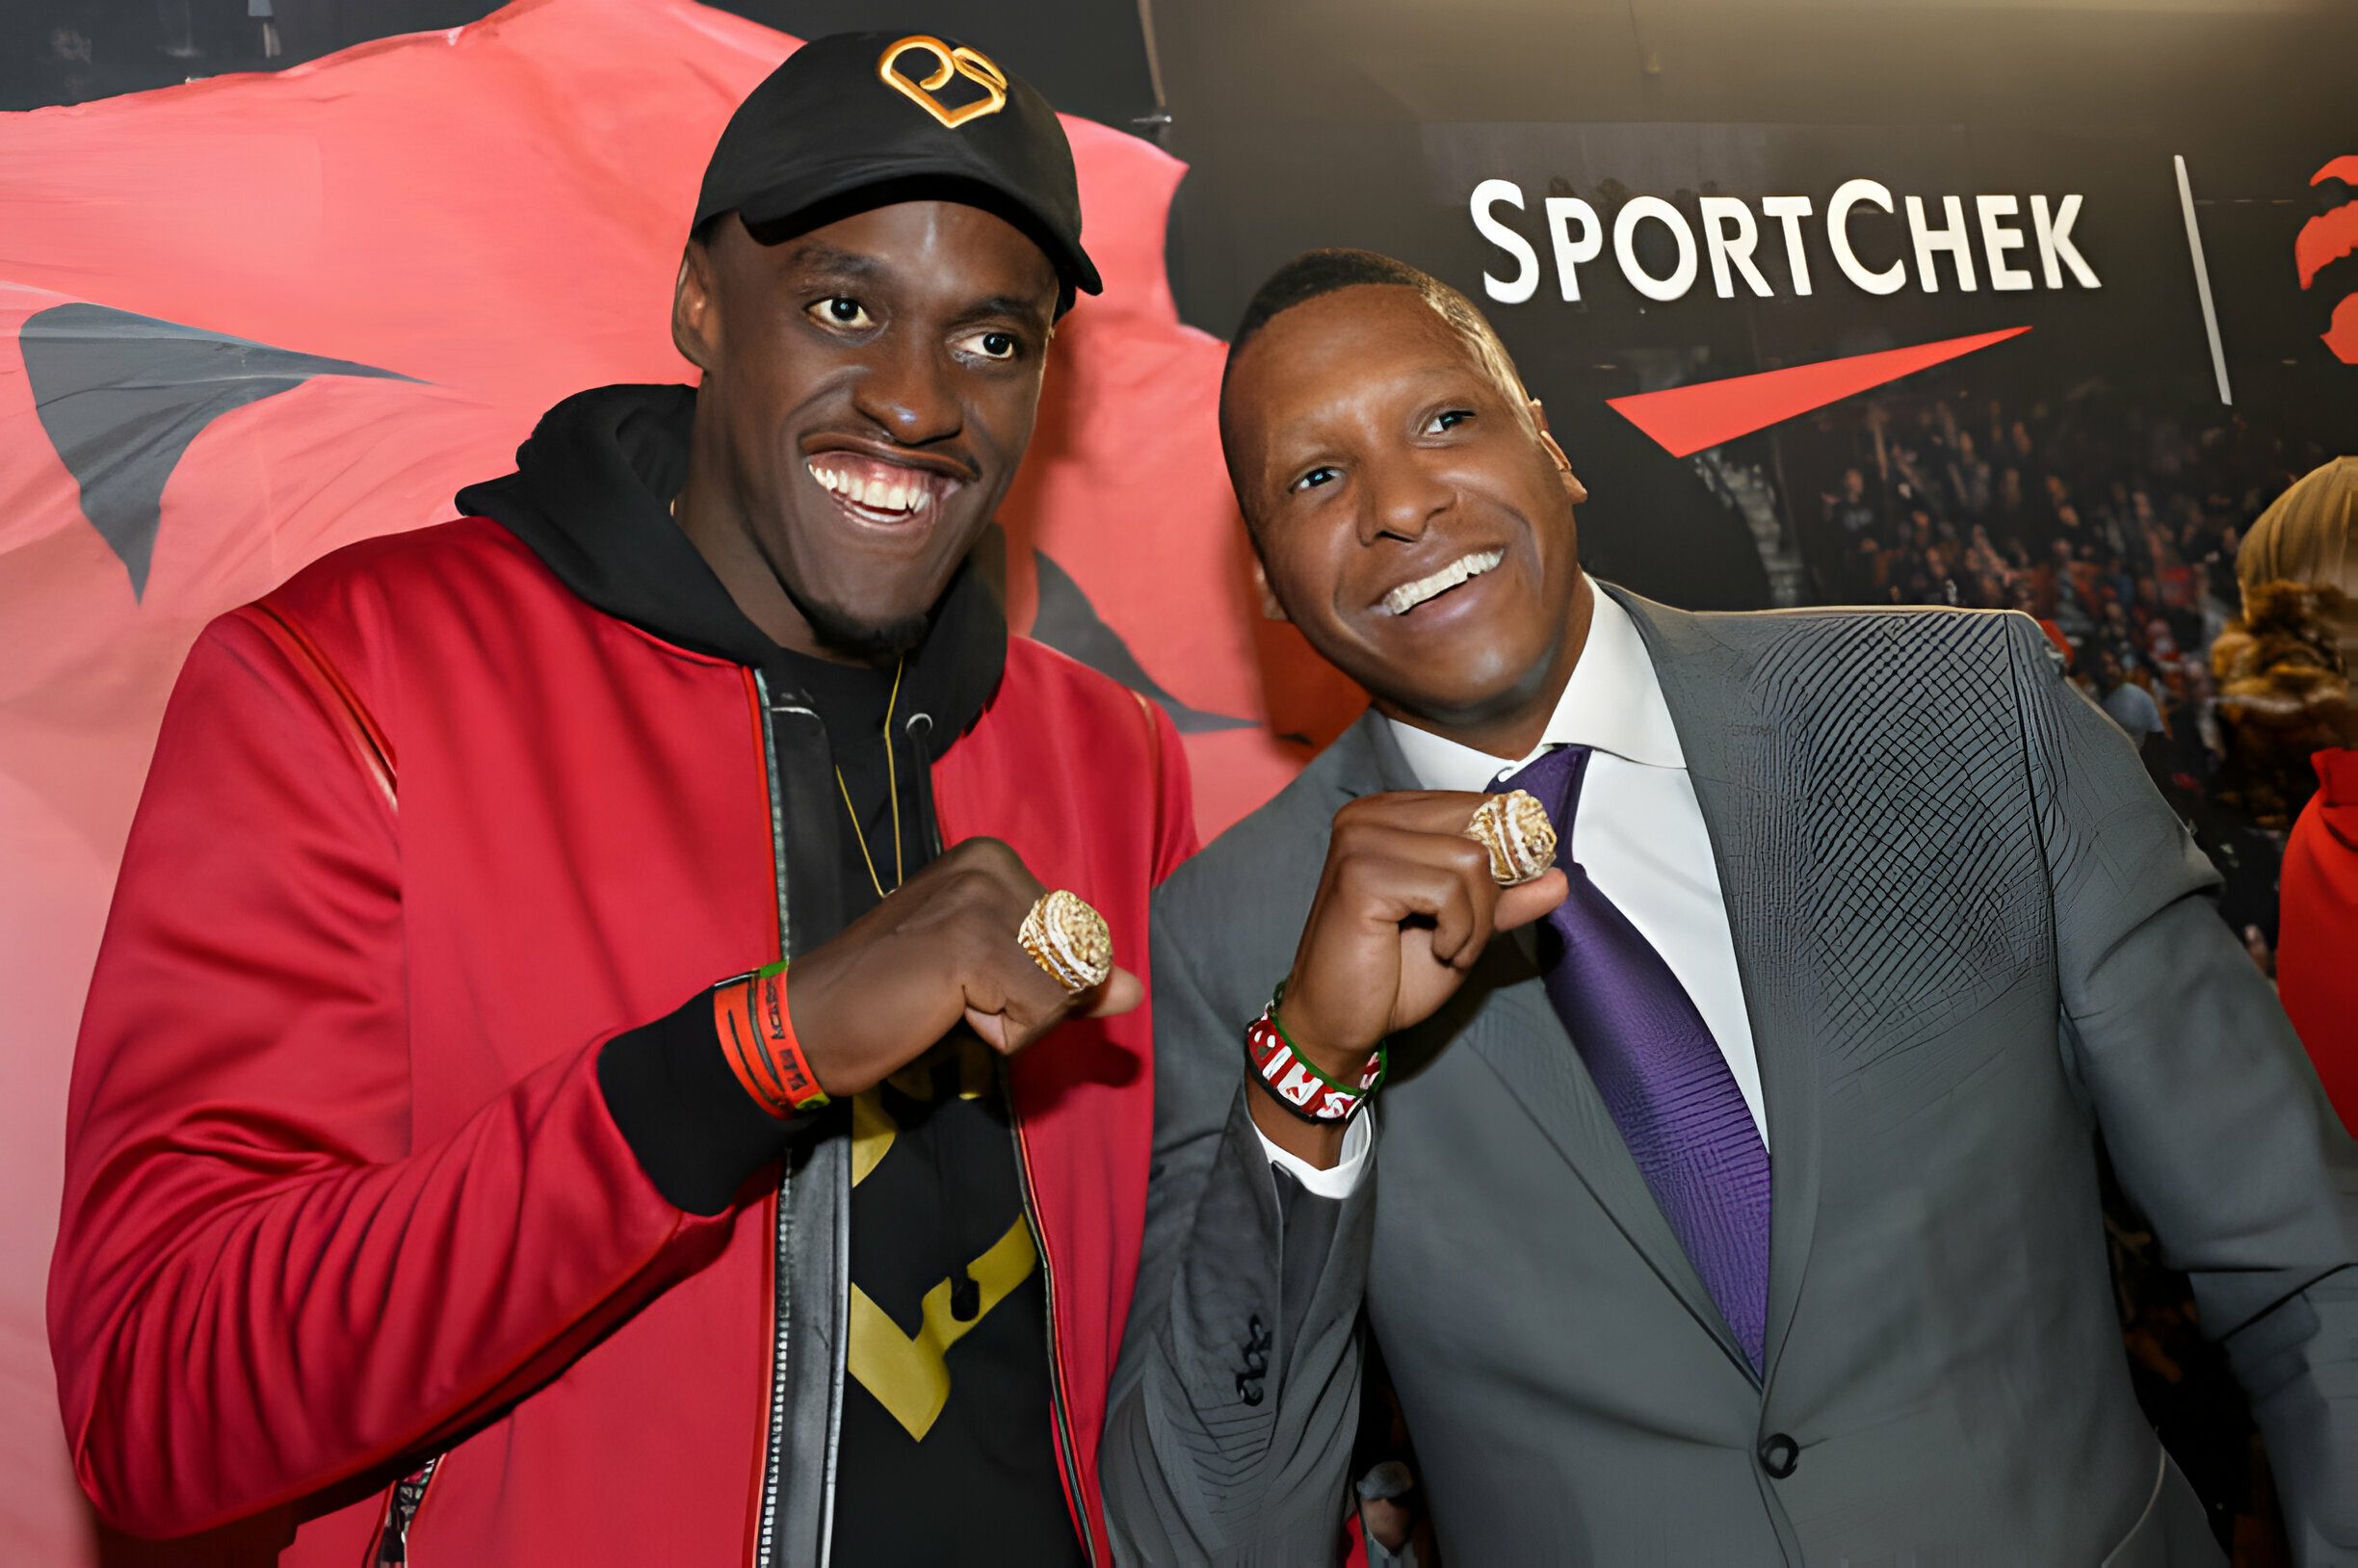 TORONTO, CANADA - OCTOBER 22: President Masai Ujiri, and Pascal Siakam #43 of the Toronto Raptors pose for a photo with their Championship Ring after the game against the New Orleans Pelicans on October 22, 2019 at the Scotiabank Arena in Toronto, Ontario, Canada. NOTE TO USER: User expressly acknowledges and agrees that, by downloading and or using this Photograph, user is consenting to the terms and conditions of the Getty Images License Agreement. Mandatory Copyright Notice: Copyright 2019 NBAE (Photo by David Dow/NBAE via Getty Images)